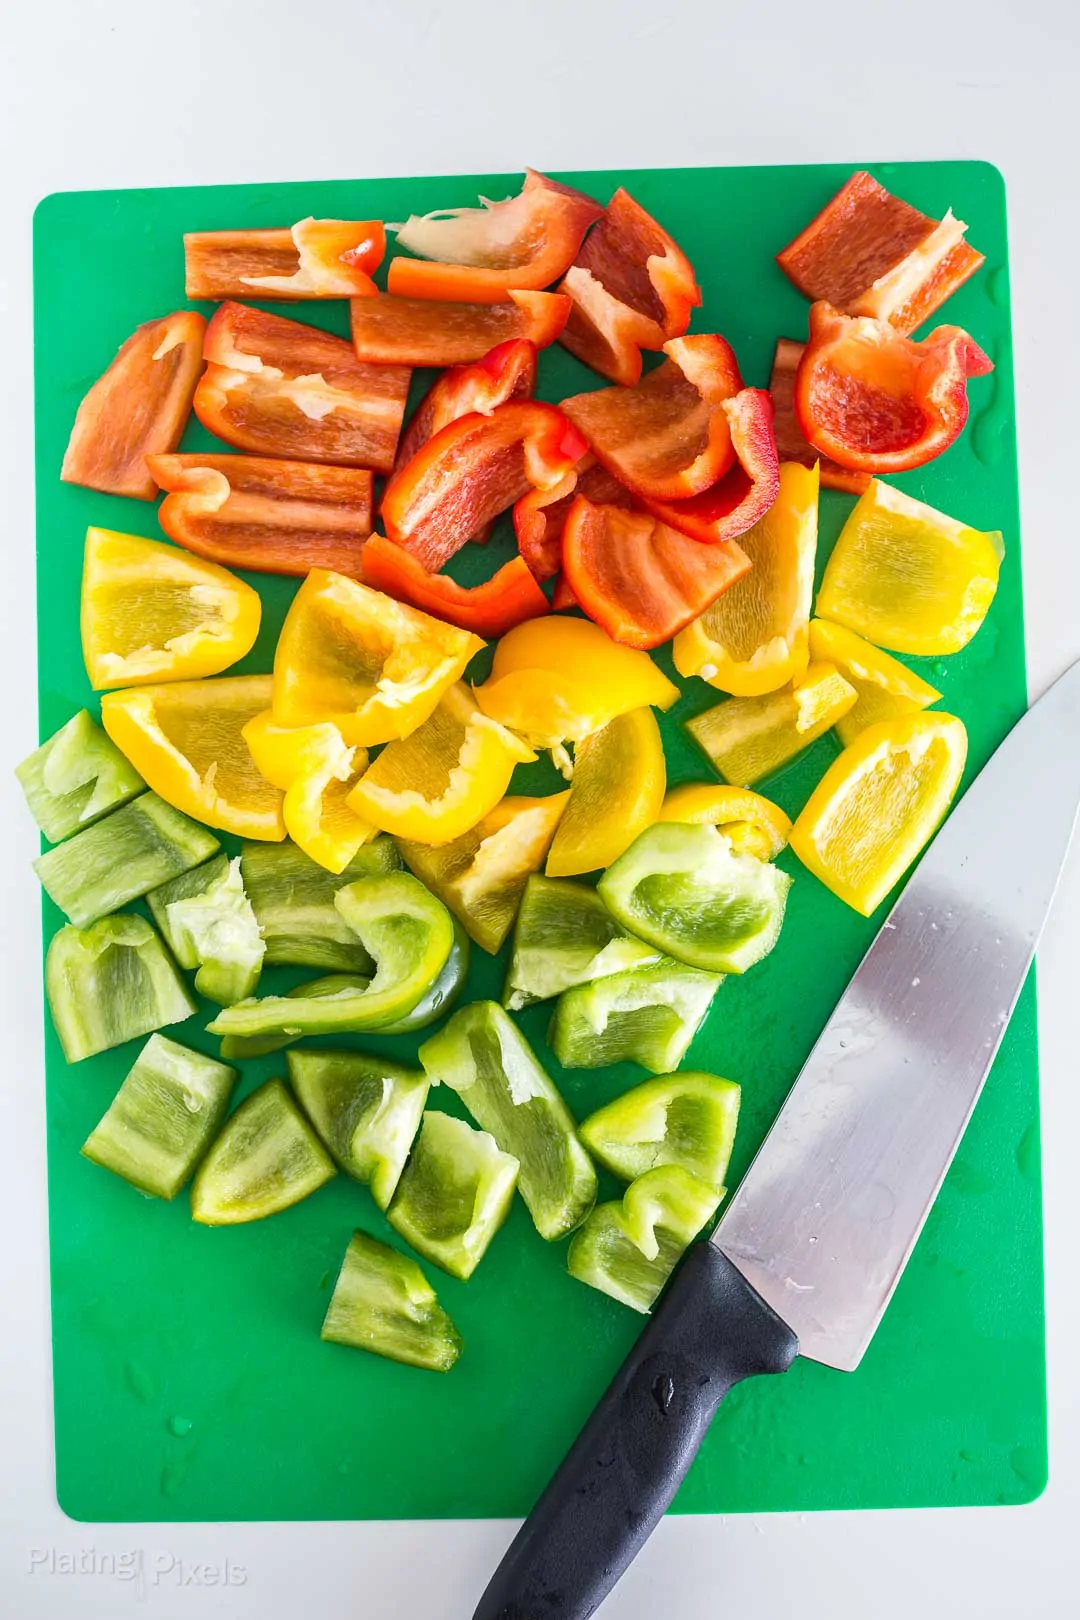 Process shot of chopped bell peppers on a cutting board